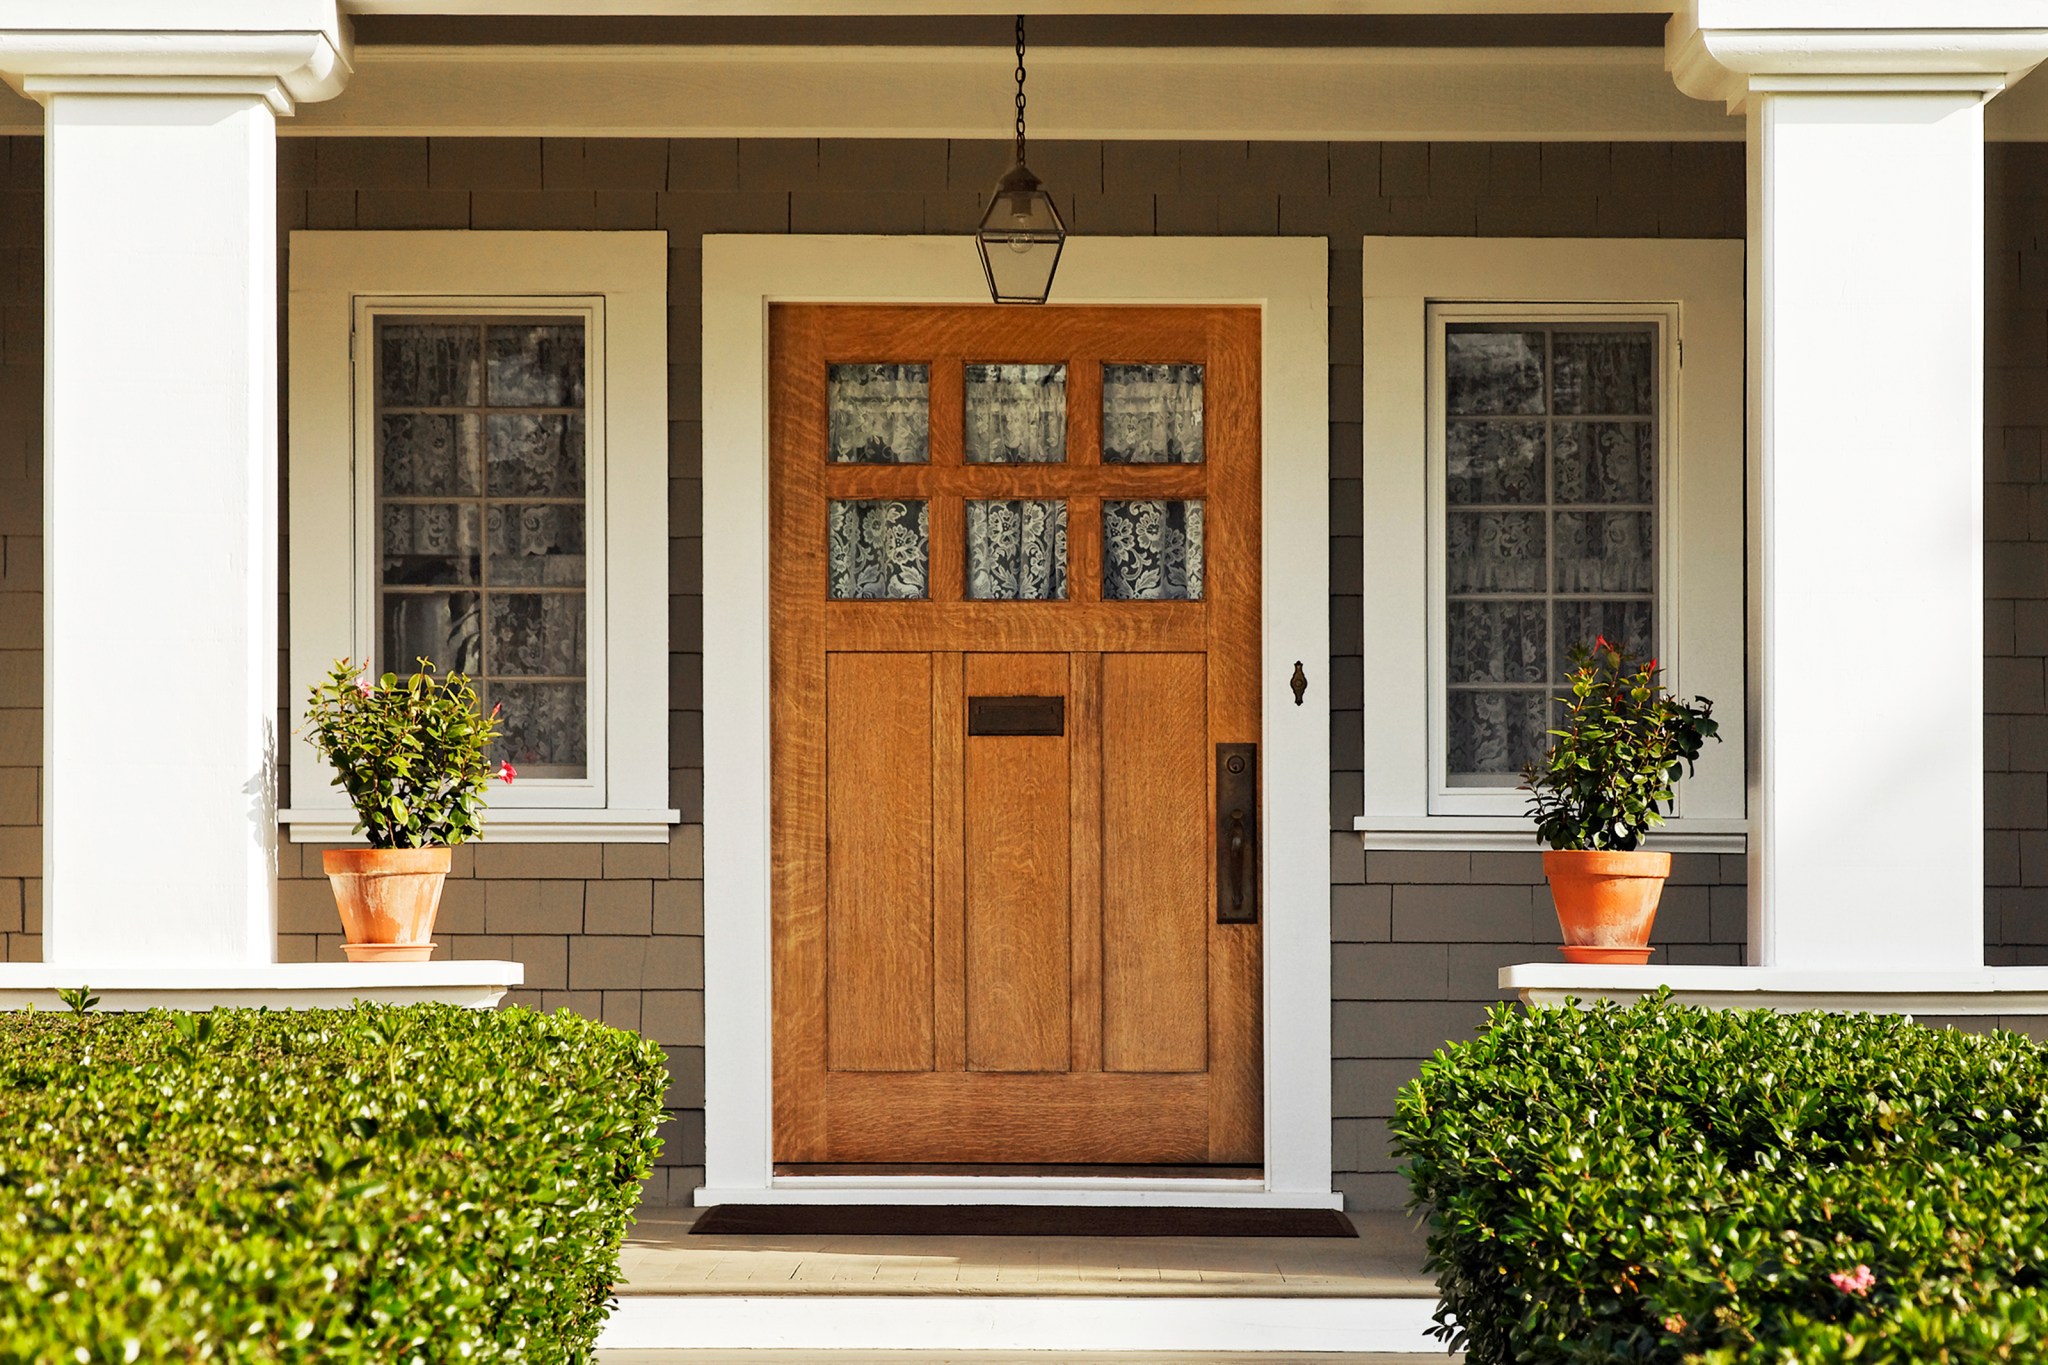 A concrete walkway bordered with hedged shrubs leads to the wooden front door of a craftsman style home with taupe shaker siding and large white columns and windows on either side of the door